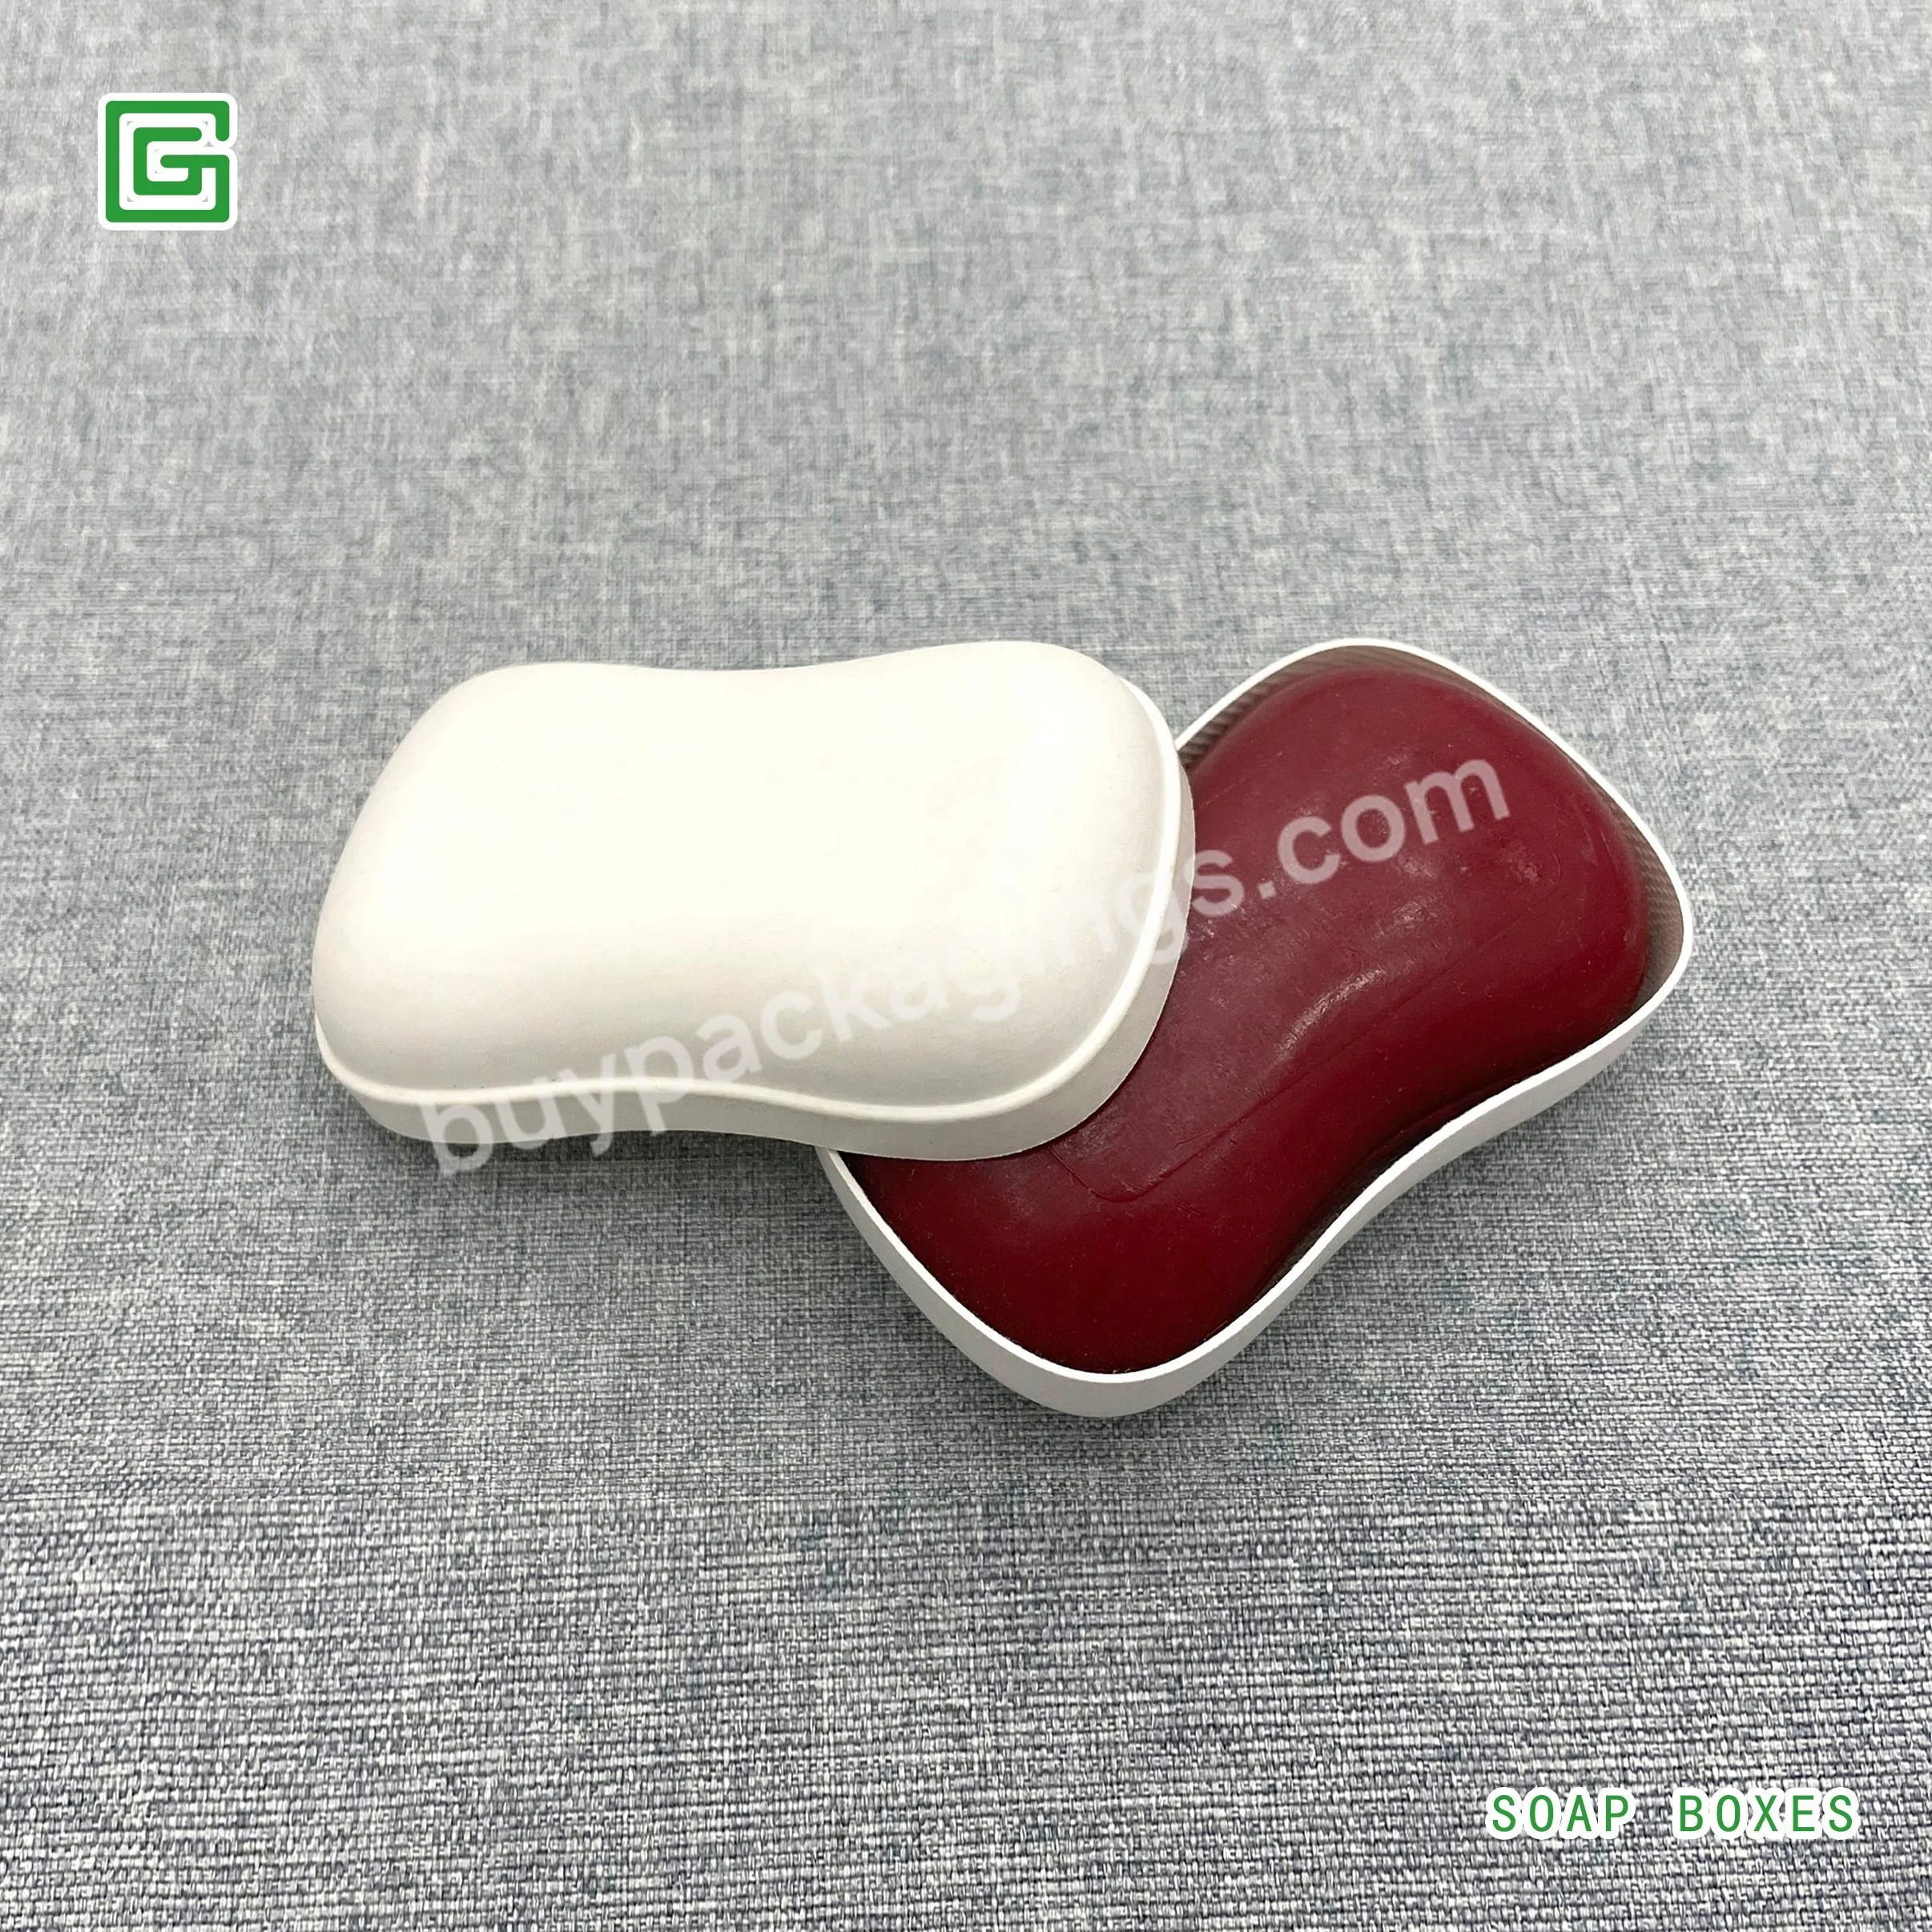 China Factory Good Quality Custom Box Soap Molded Pulp Packaging - Buy Pulp Mold Soap Packaging,Pulp Molded Packaging Box,Custom Molded Pulp Packaging.